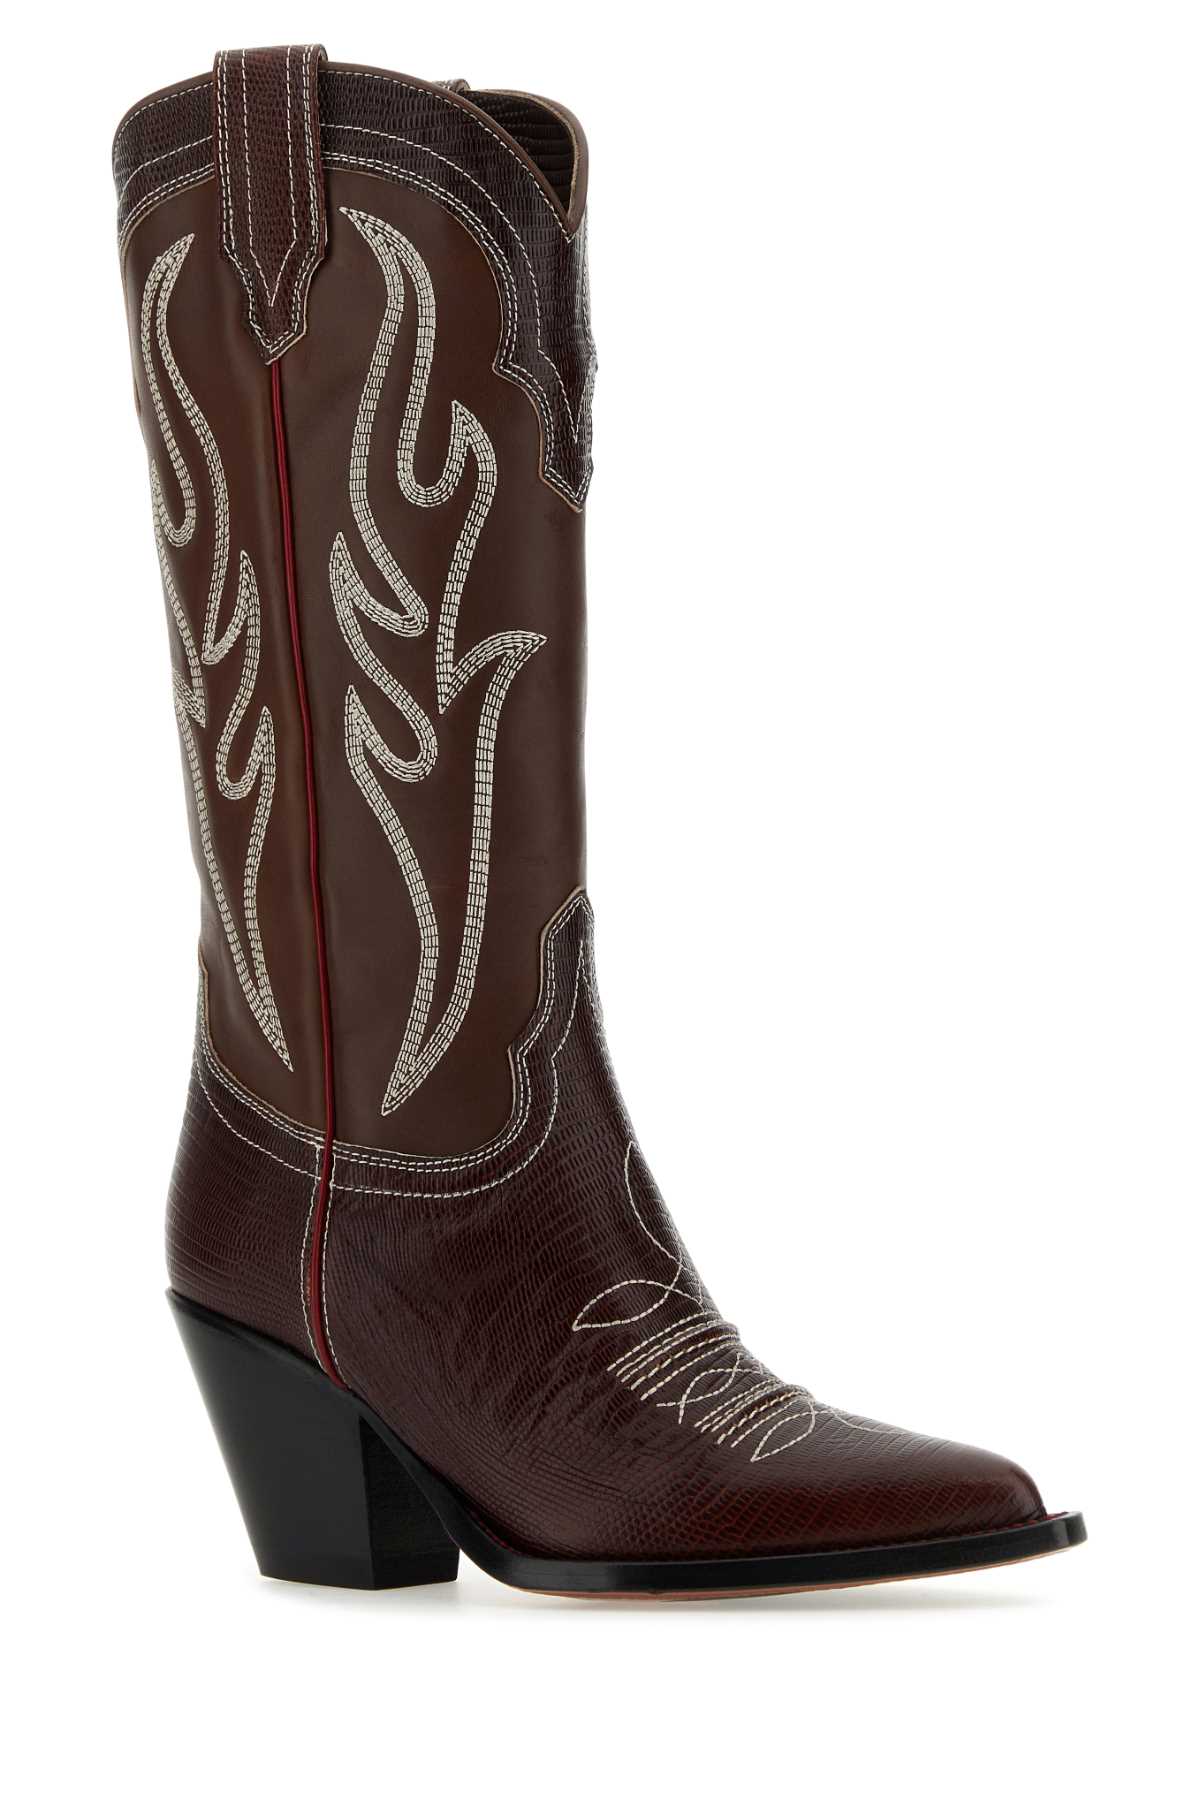 Shop Sonora Brown Leather Santa Fe Boots